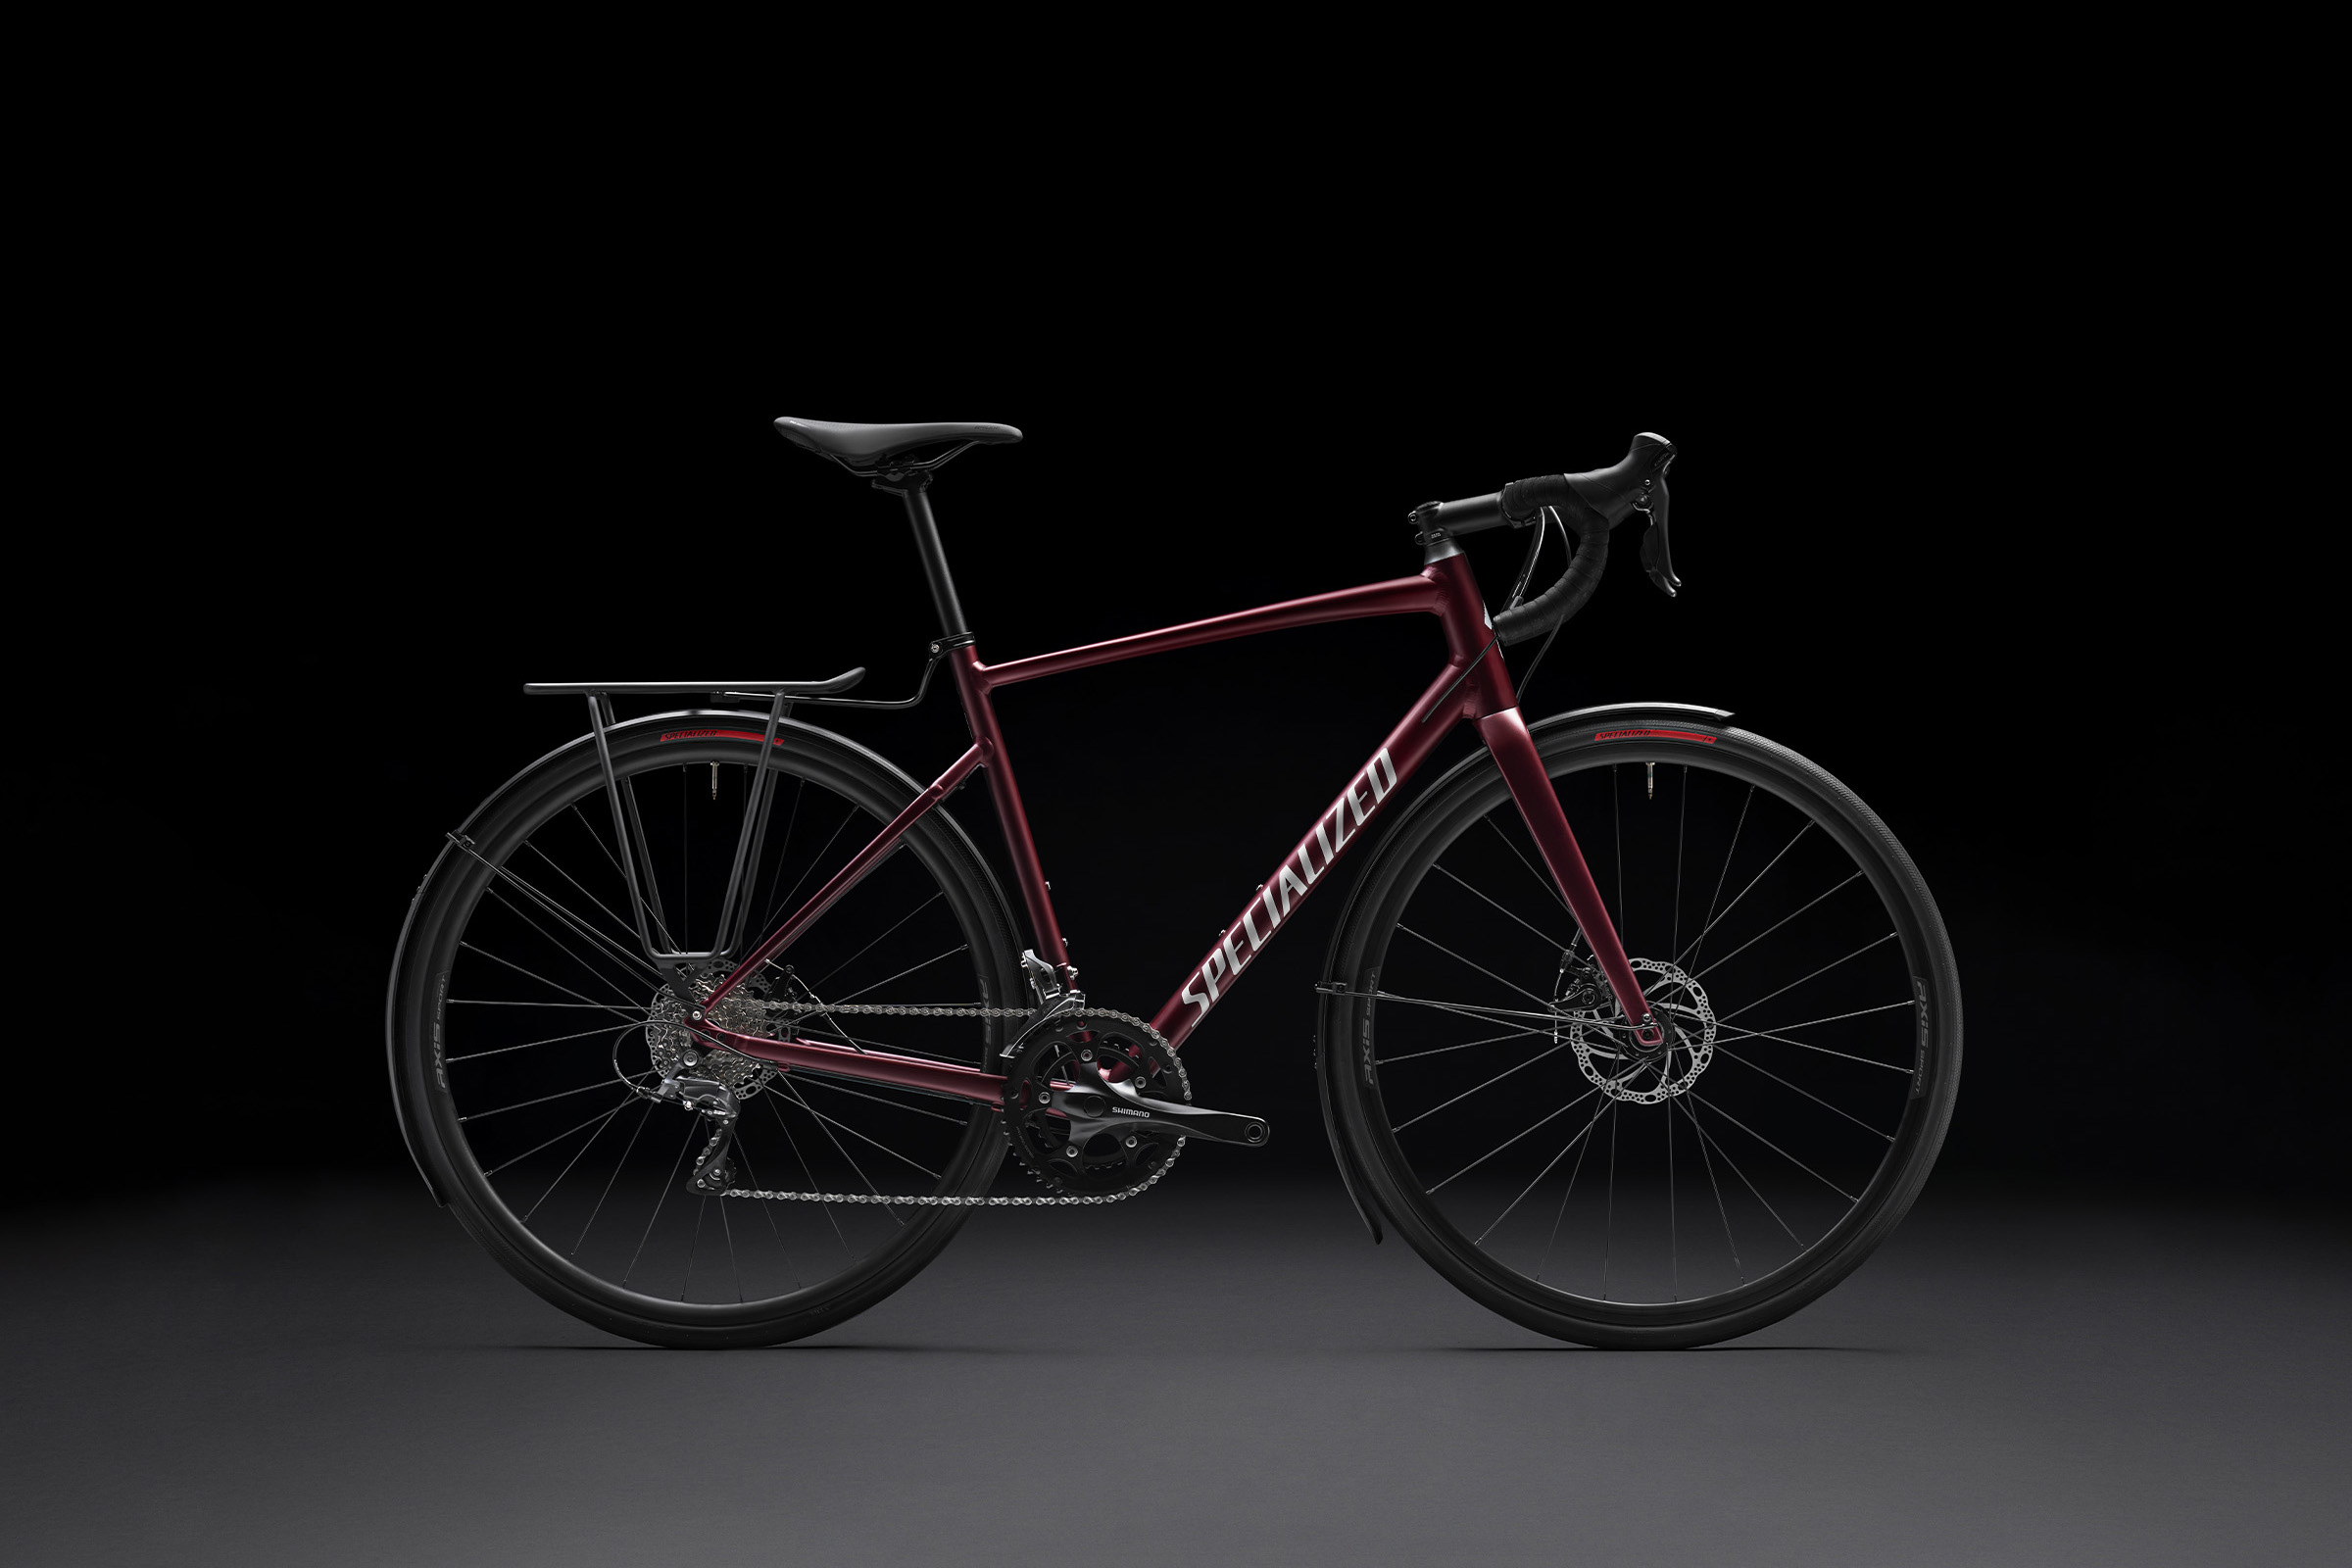 New Specialized Allez loses rim brakes and ups versatility with